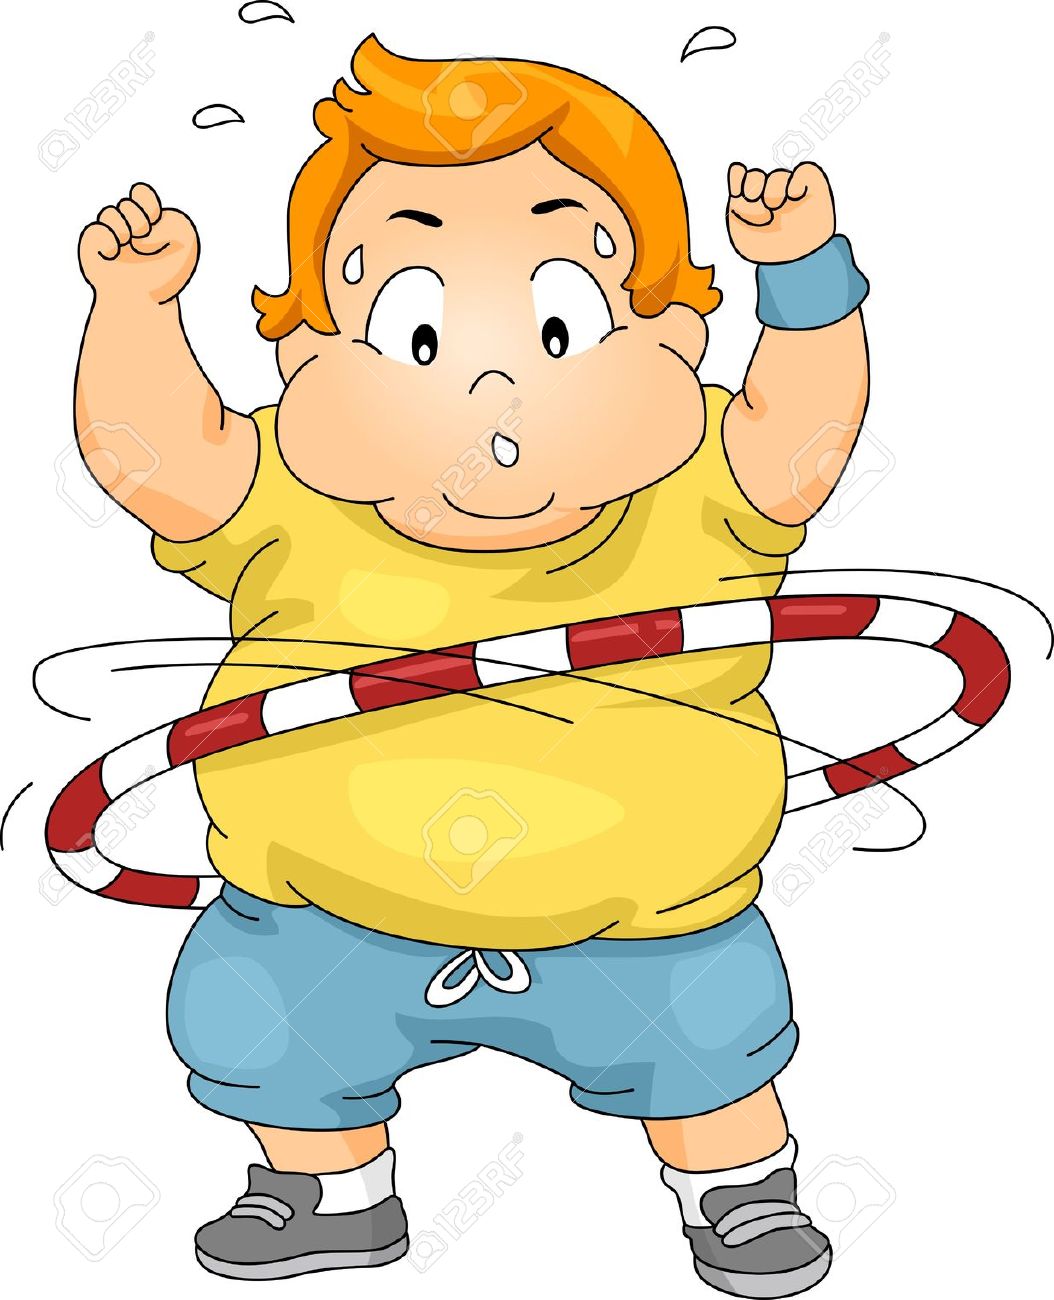 Illustration Of An Overweight Boy Using A Hula Hoop Stock Illustration